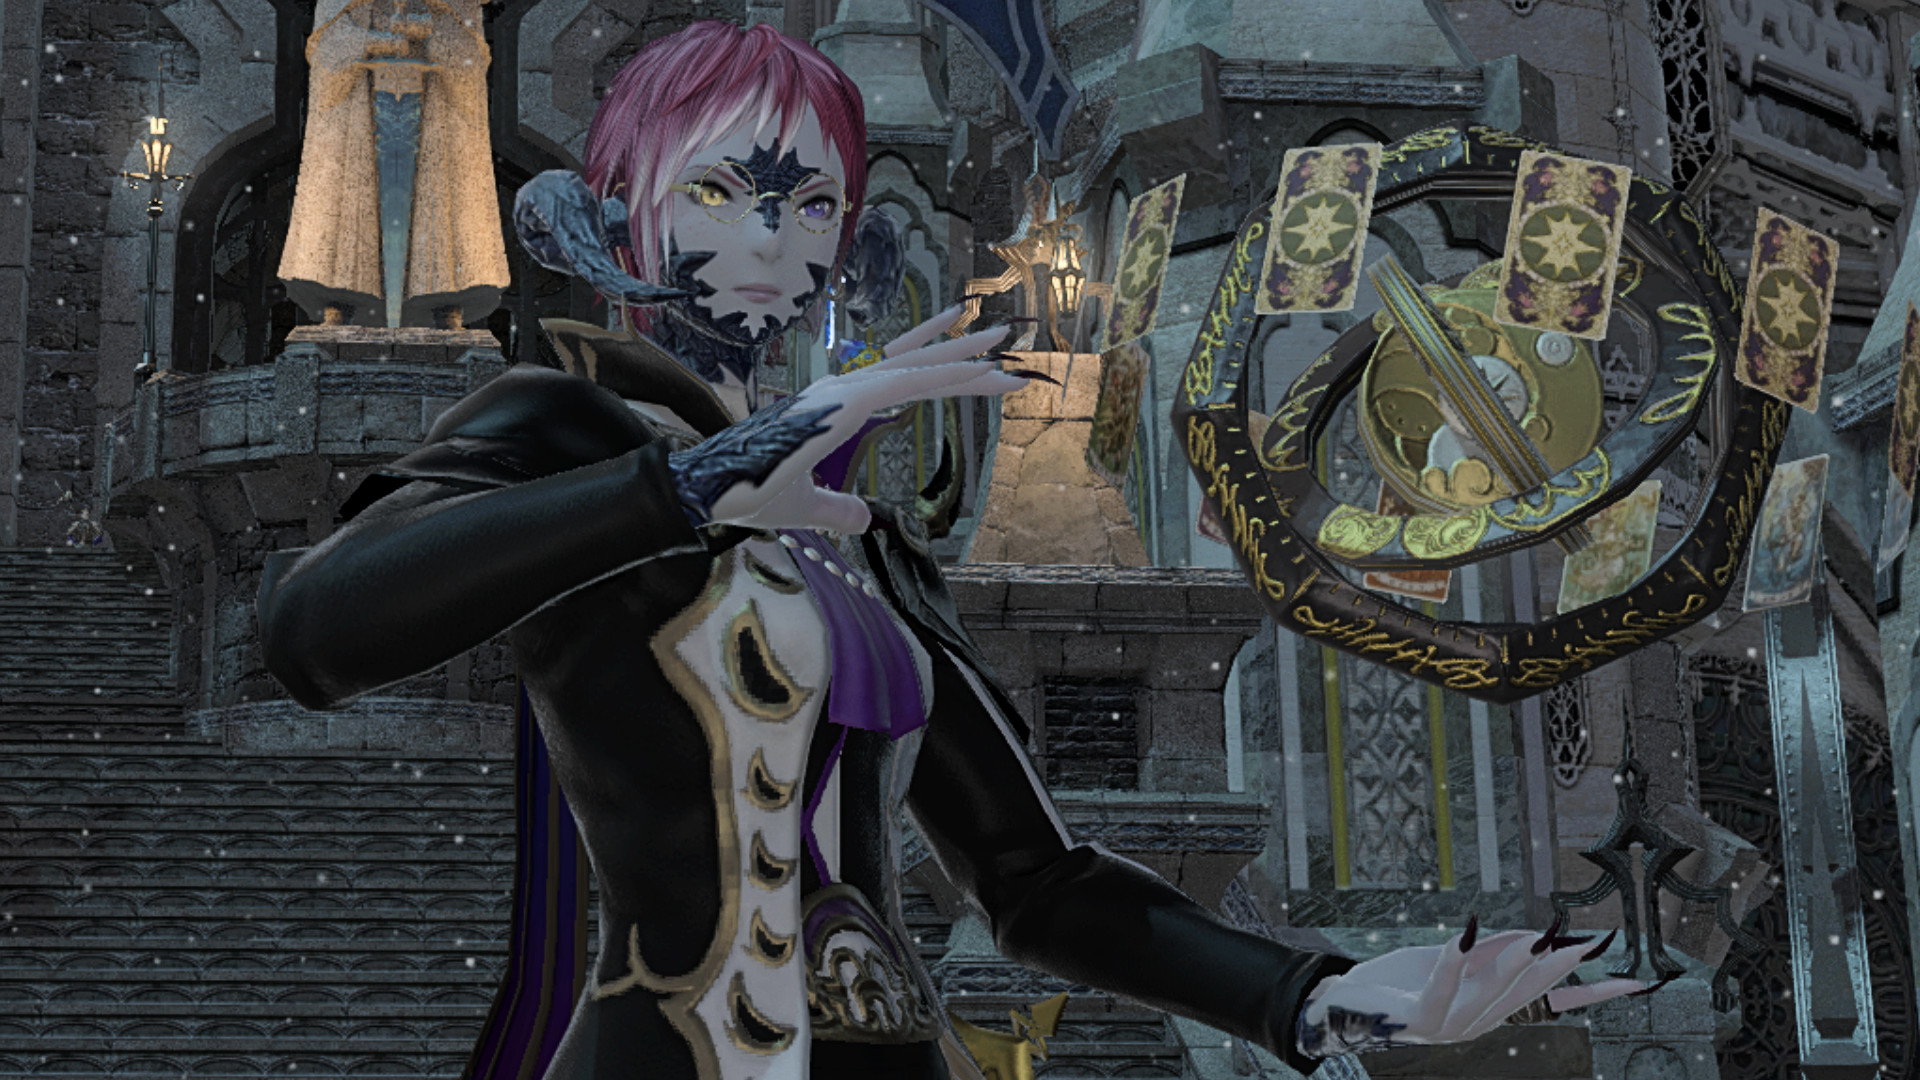 FFXIV Astrologian and Dragoon reworks delayed to 7.0 release